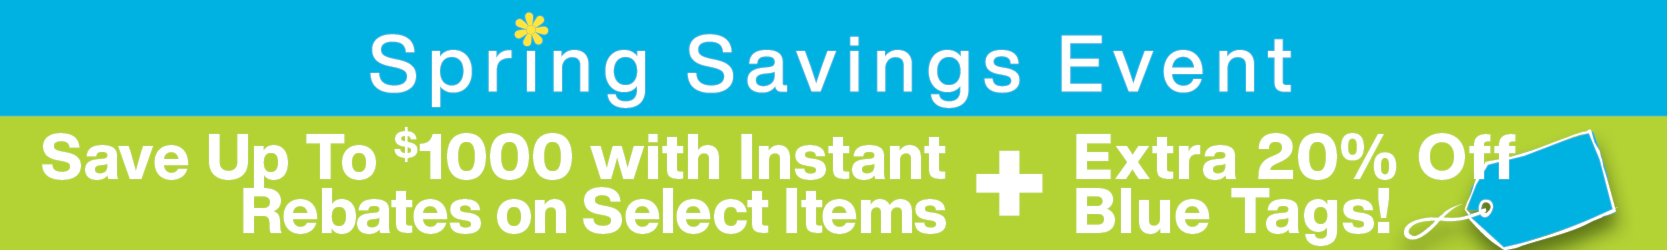 Spring Savings Event - save up to $1000 with instant rebates on select items